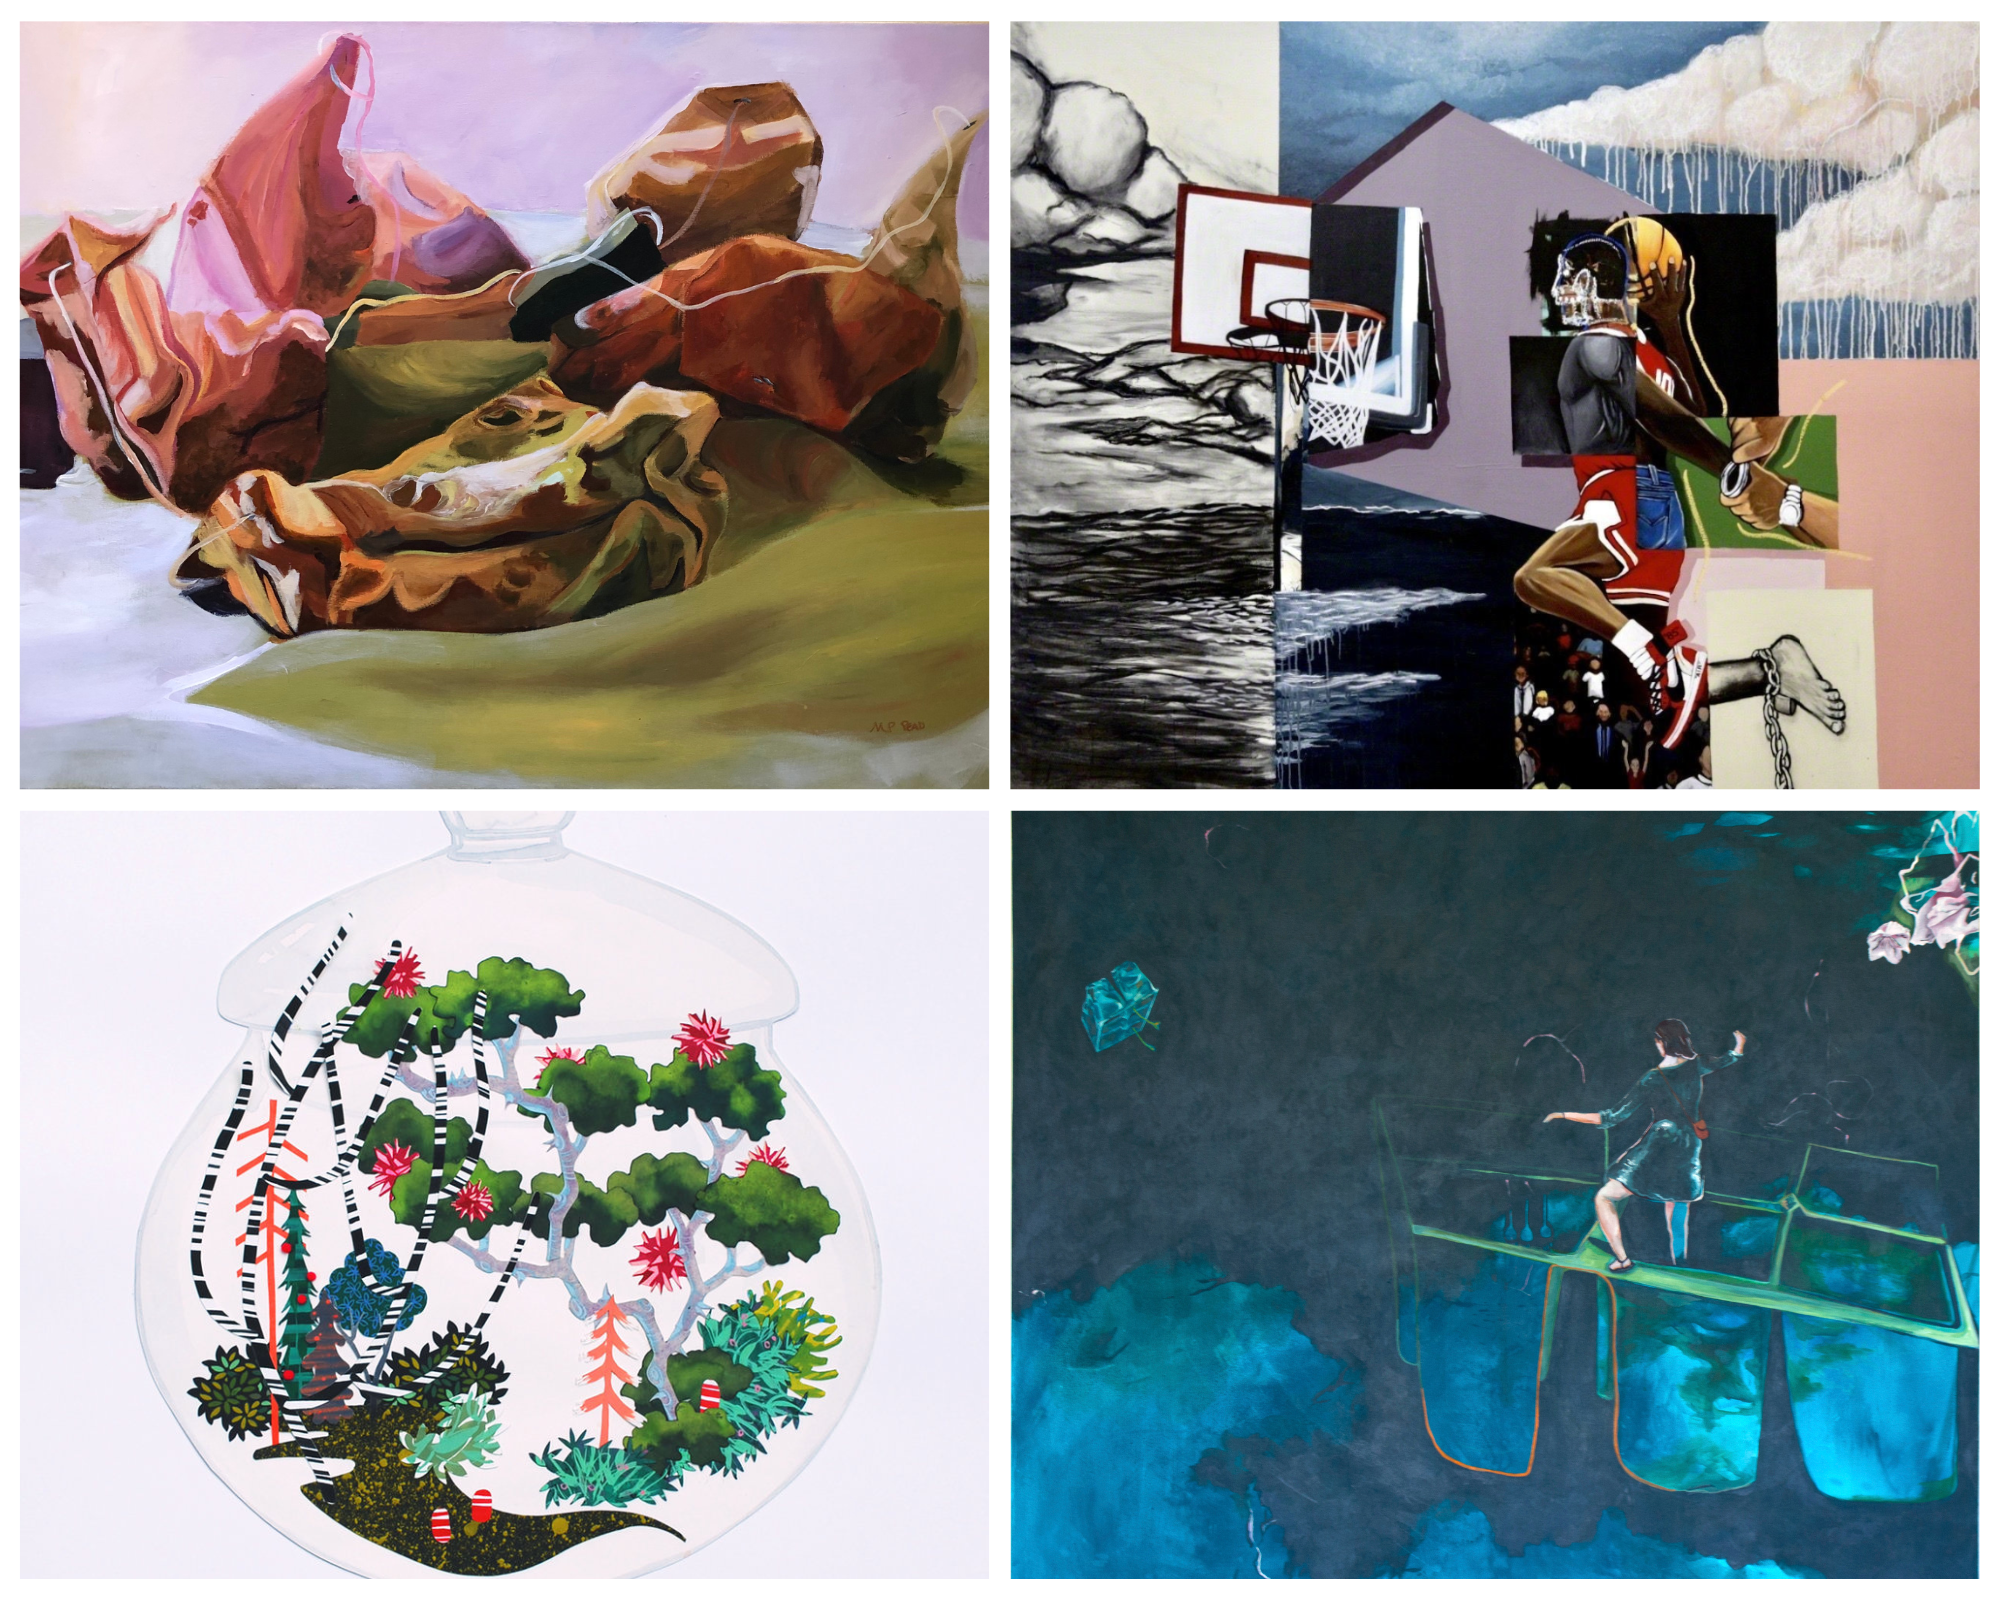 Collage of paintings found in Rhodes College Art Collection. Top Left: "Teabags" by Mary Pat Pead; Top Right: "Hoop Dreams" by Malik Roberts; Bottom Left: "For what you have tamed you are forever responsible" by Erin Harmon; Bottom Right: "Boundearthless" by McKenzie Drake